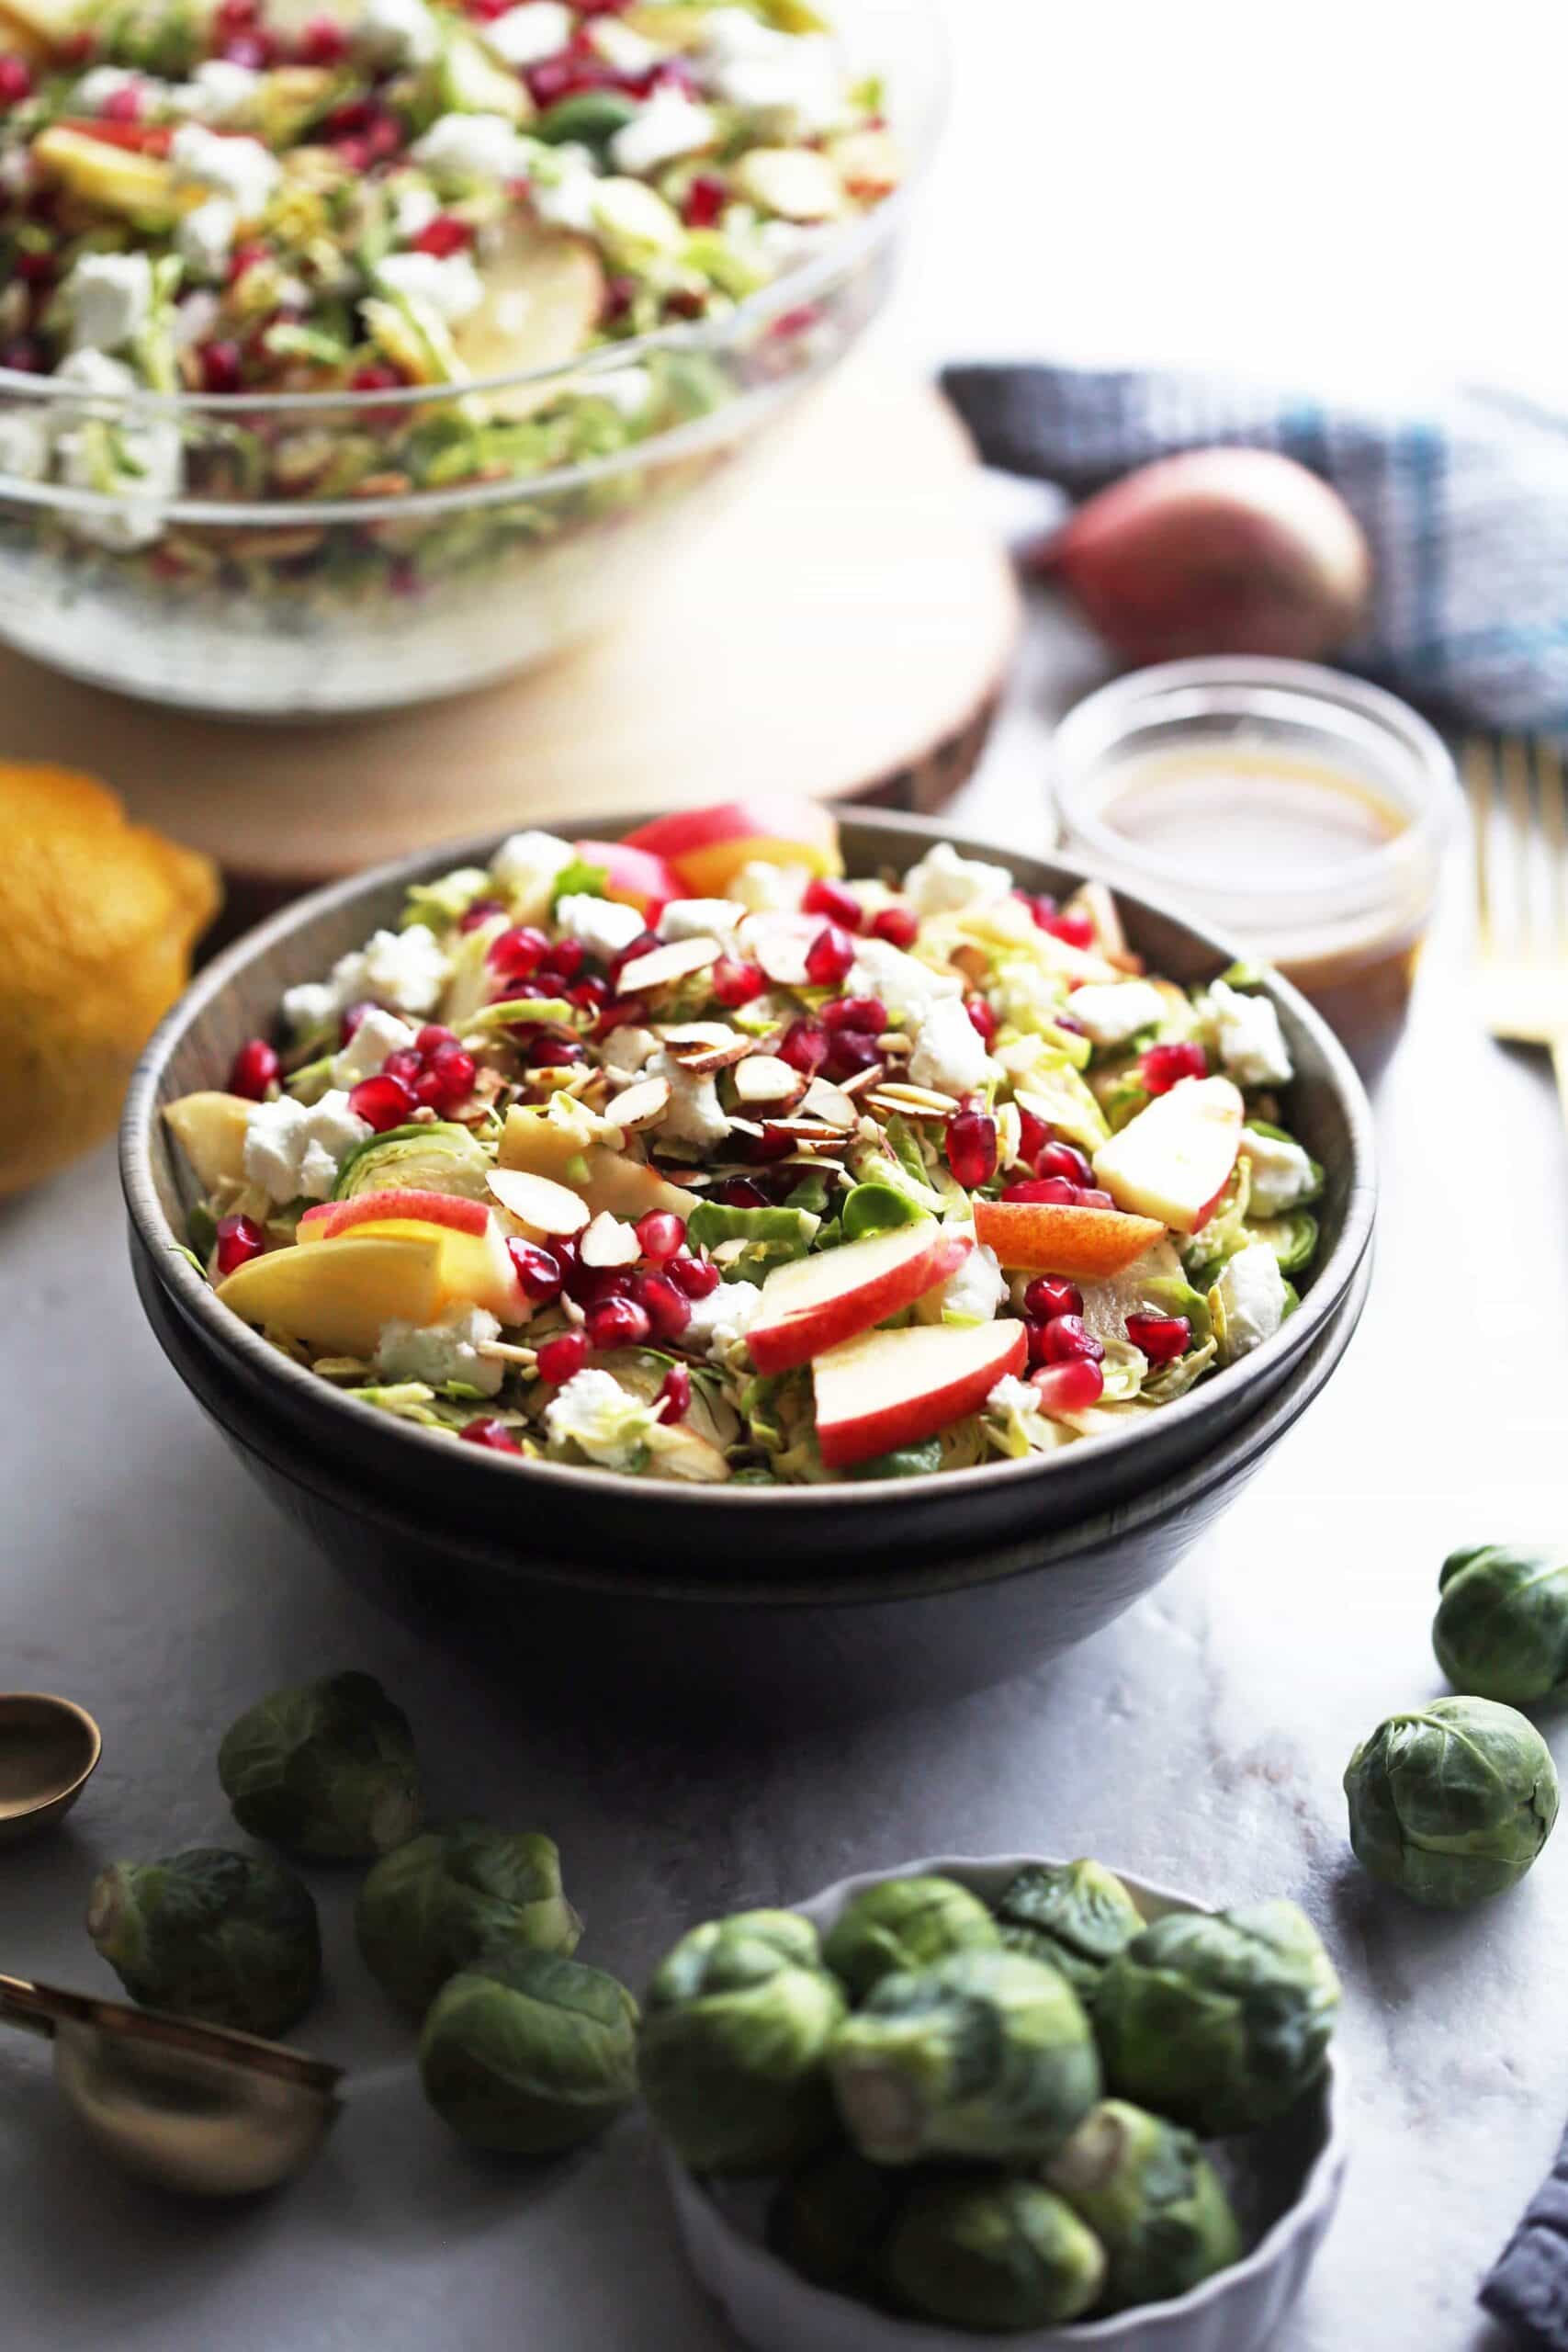 Shaved Brussels Sprouts and Pomegranate Salad with Lemon Balsamic Vinaigrette